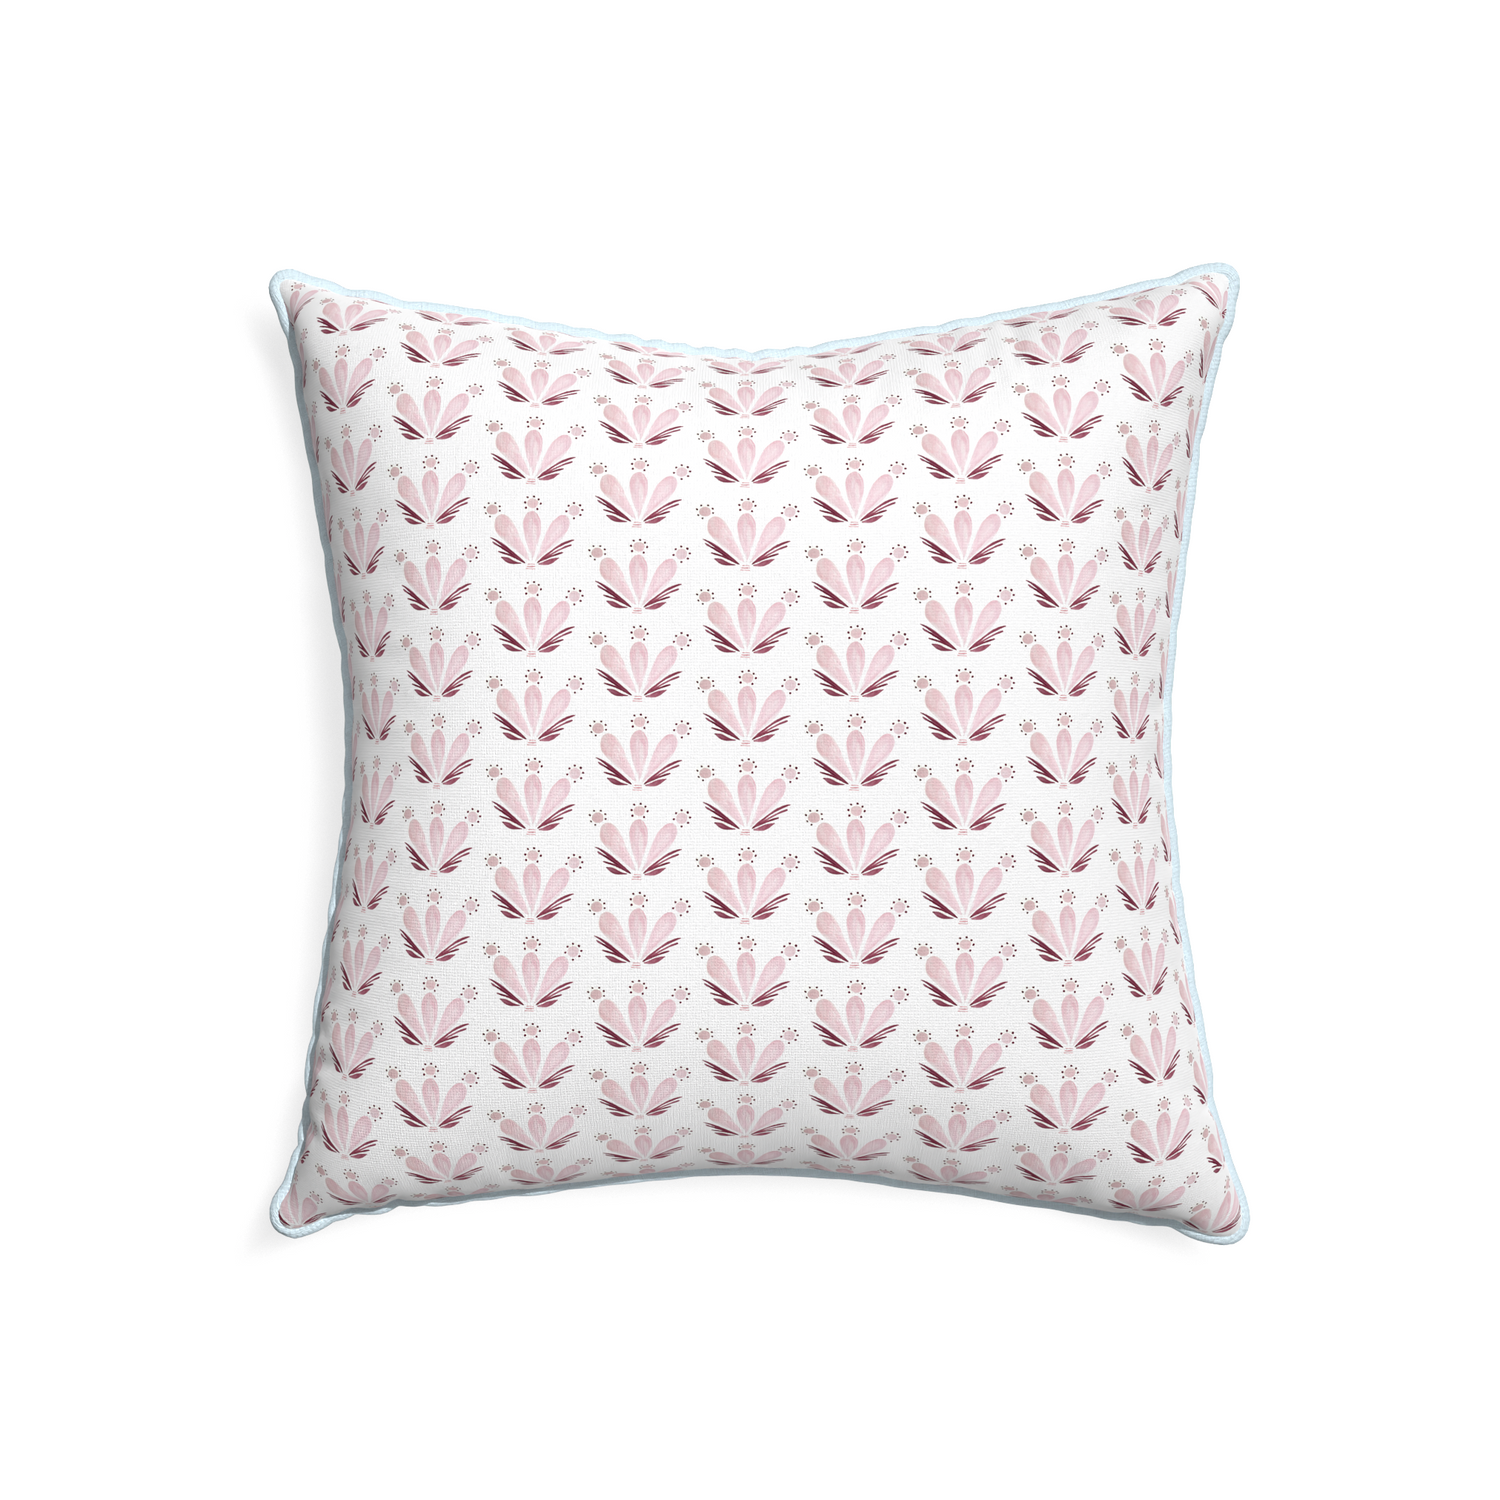 22-square serena pink custom pink & burgundy drop repeat floralpillow with powder piping on white background